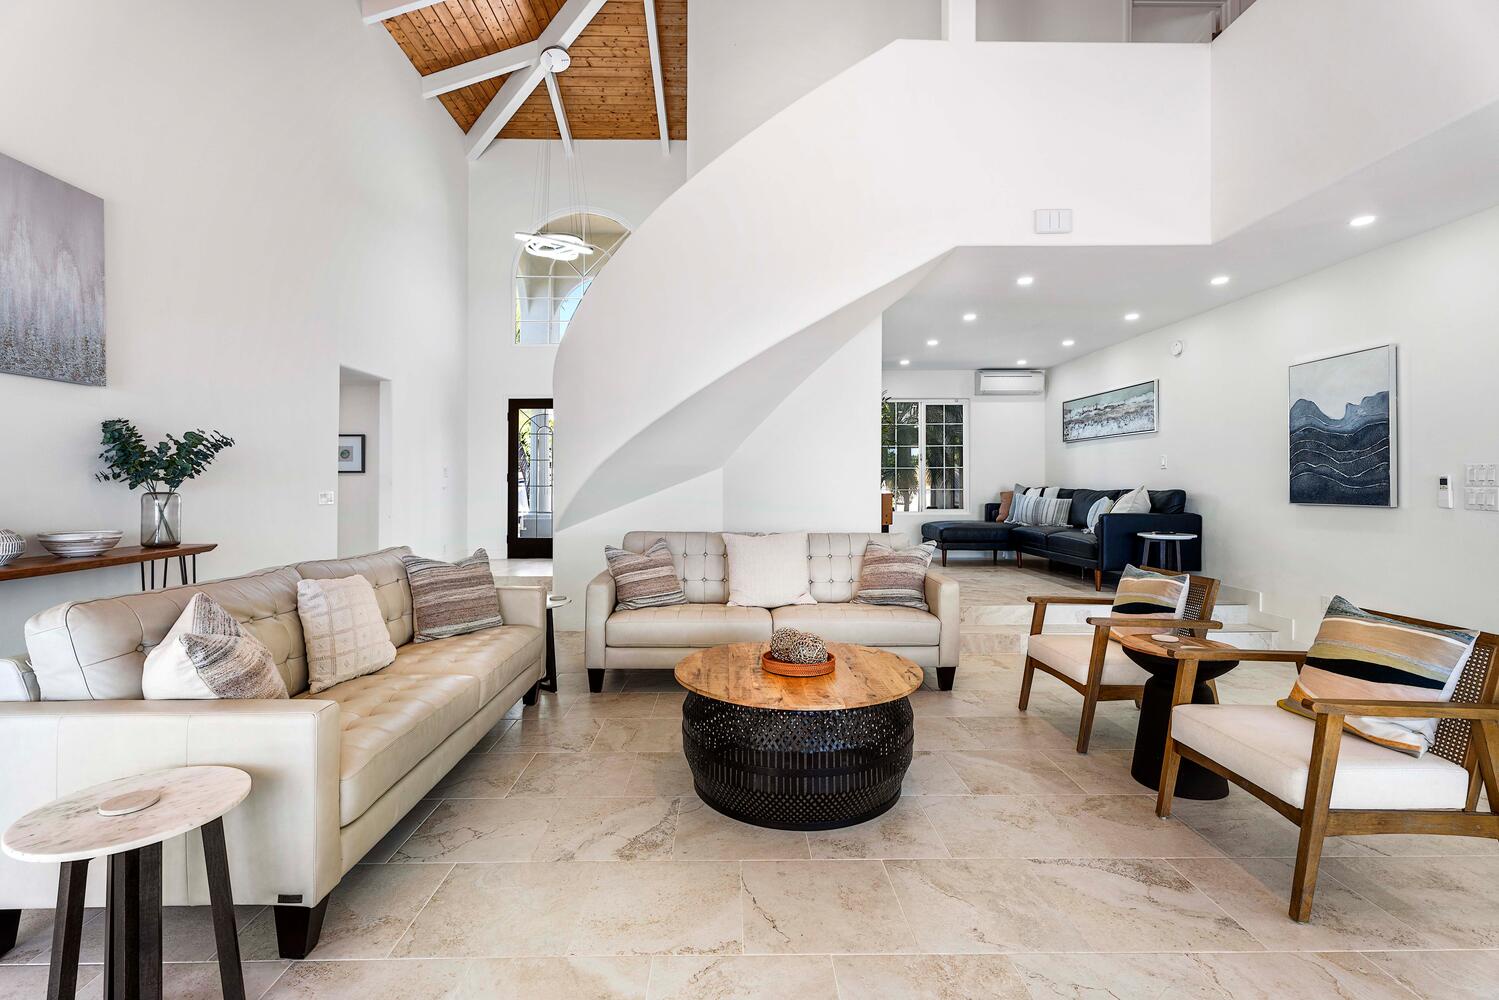 Kailua Kona Vacation Rentals, Ho'okipa Hale - Flounder in the spaciousness of the living area, highlighted by soaring vaulted ceilings and sumptuous sofas.